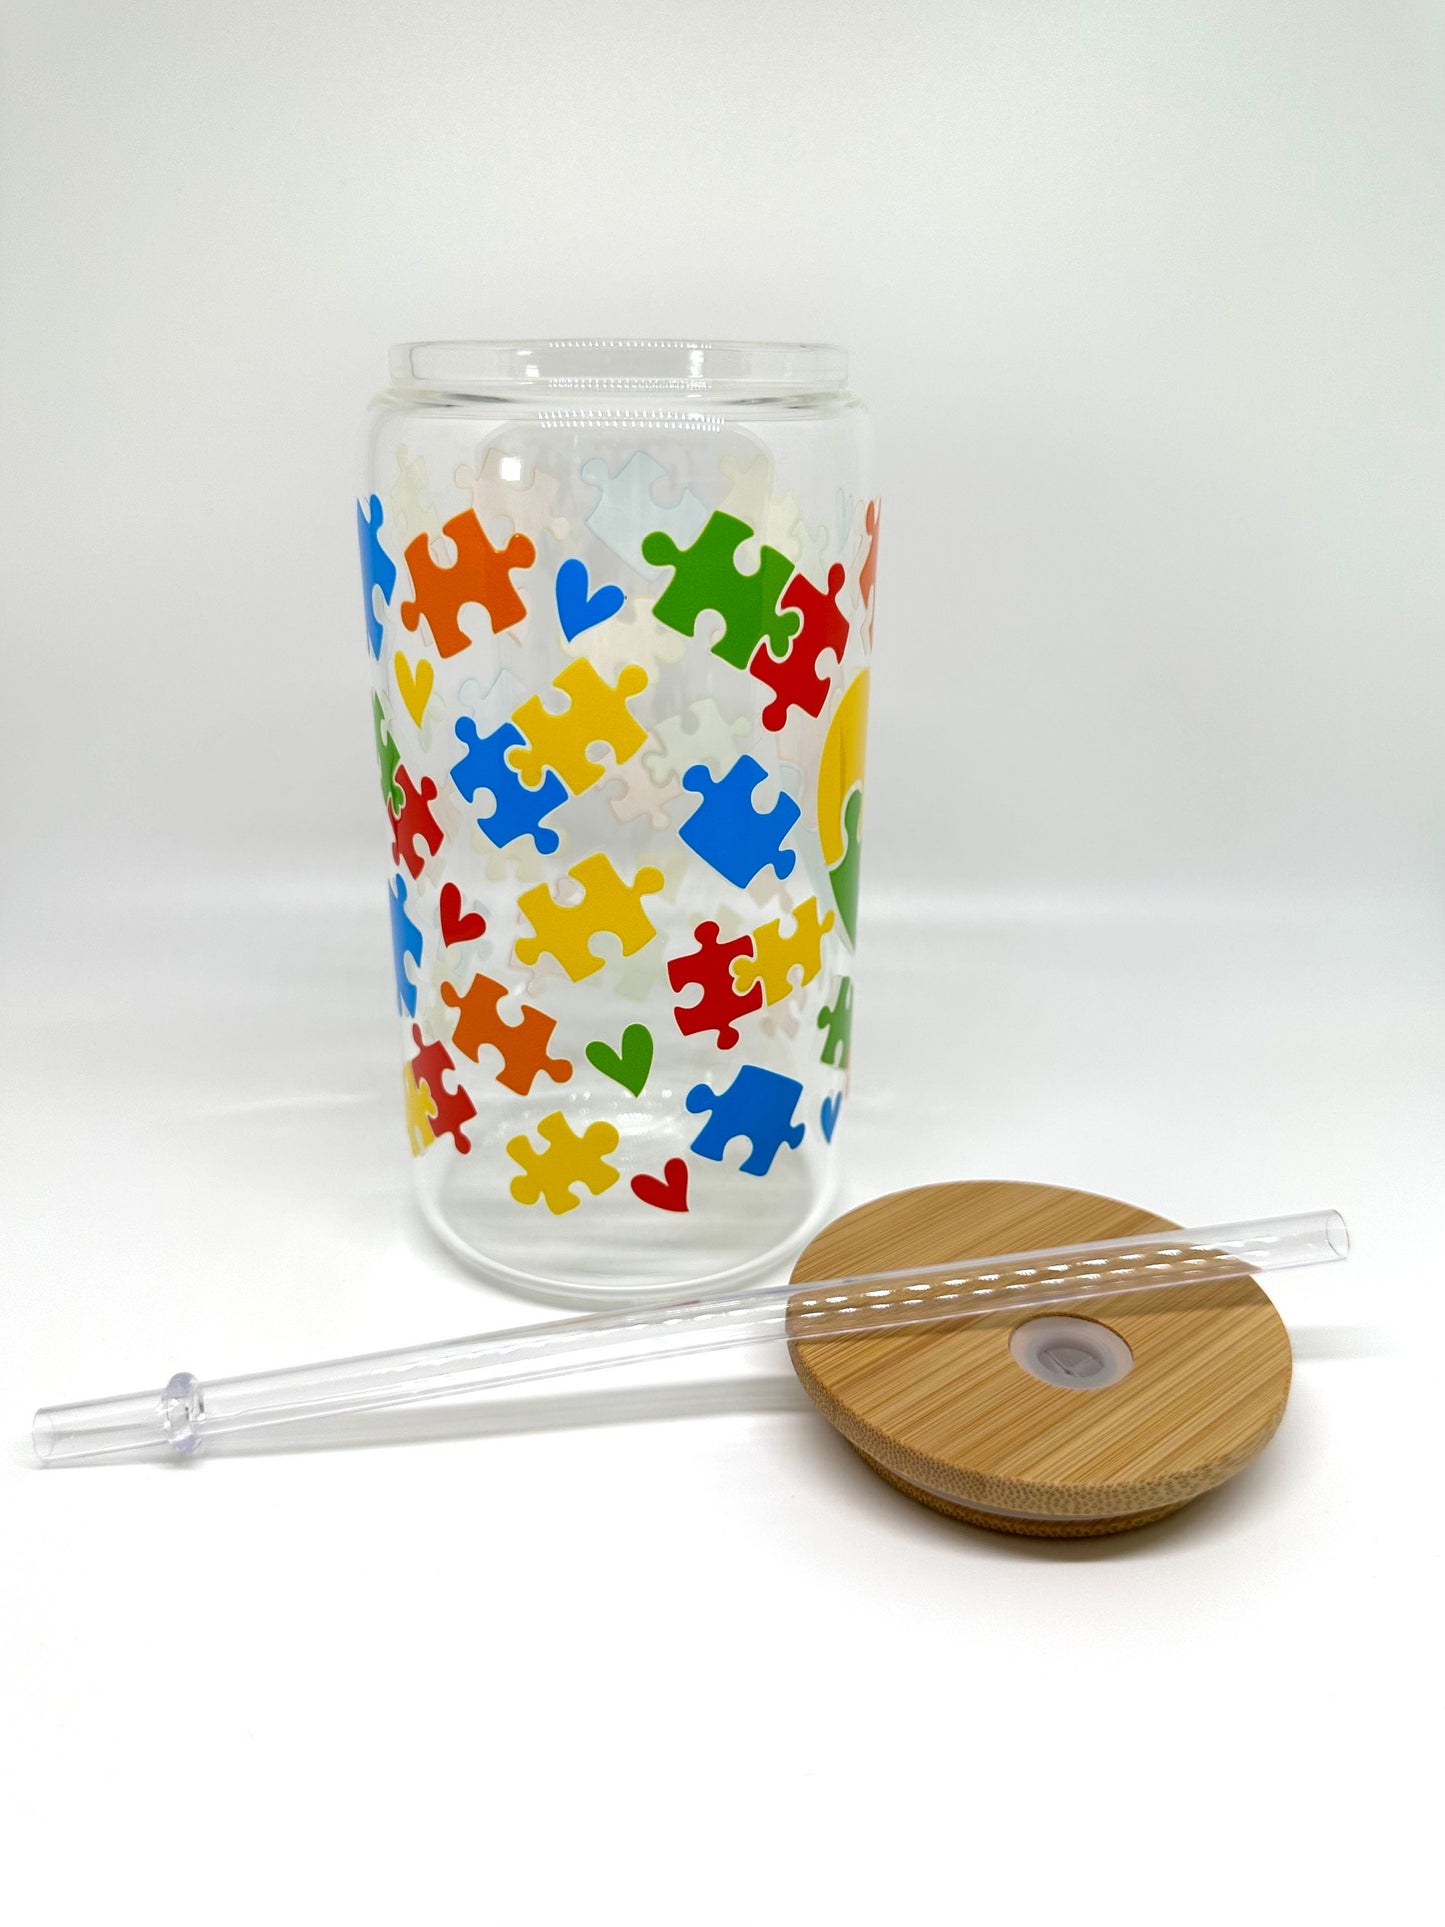 Autism Awareness Glass Cup, Autism Support Glass Cup